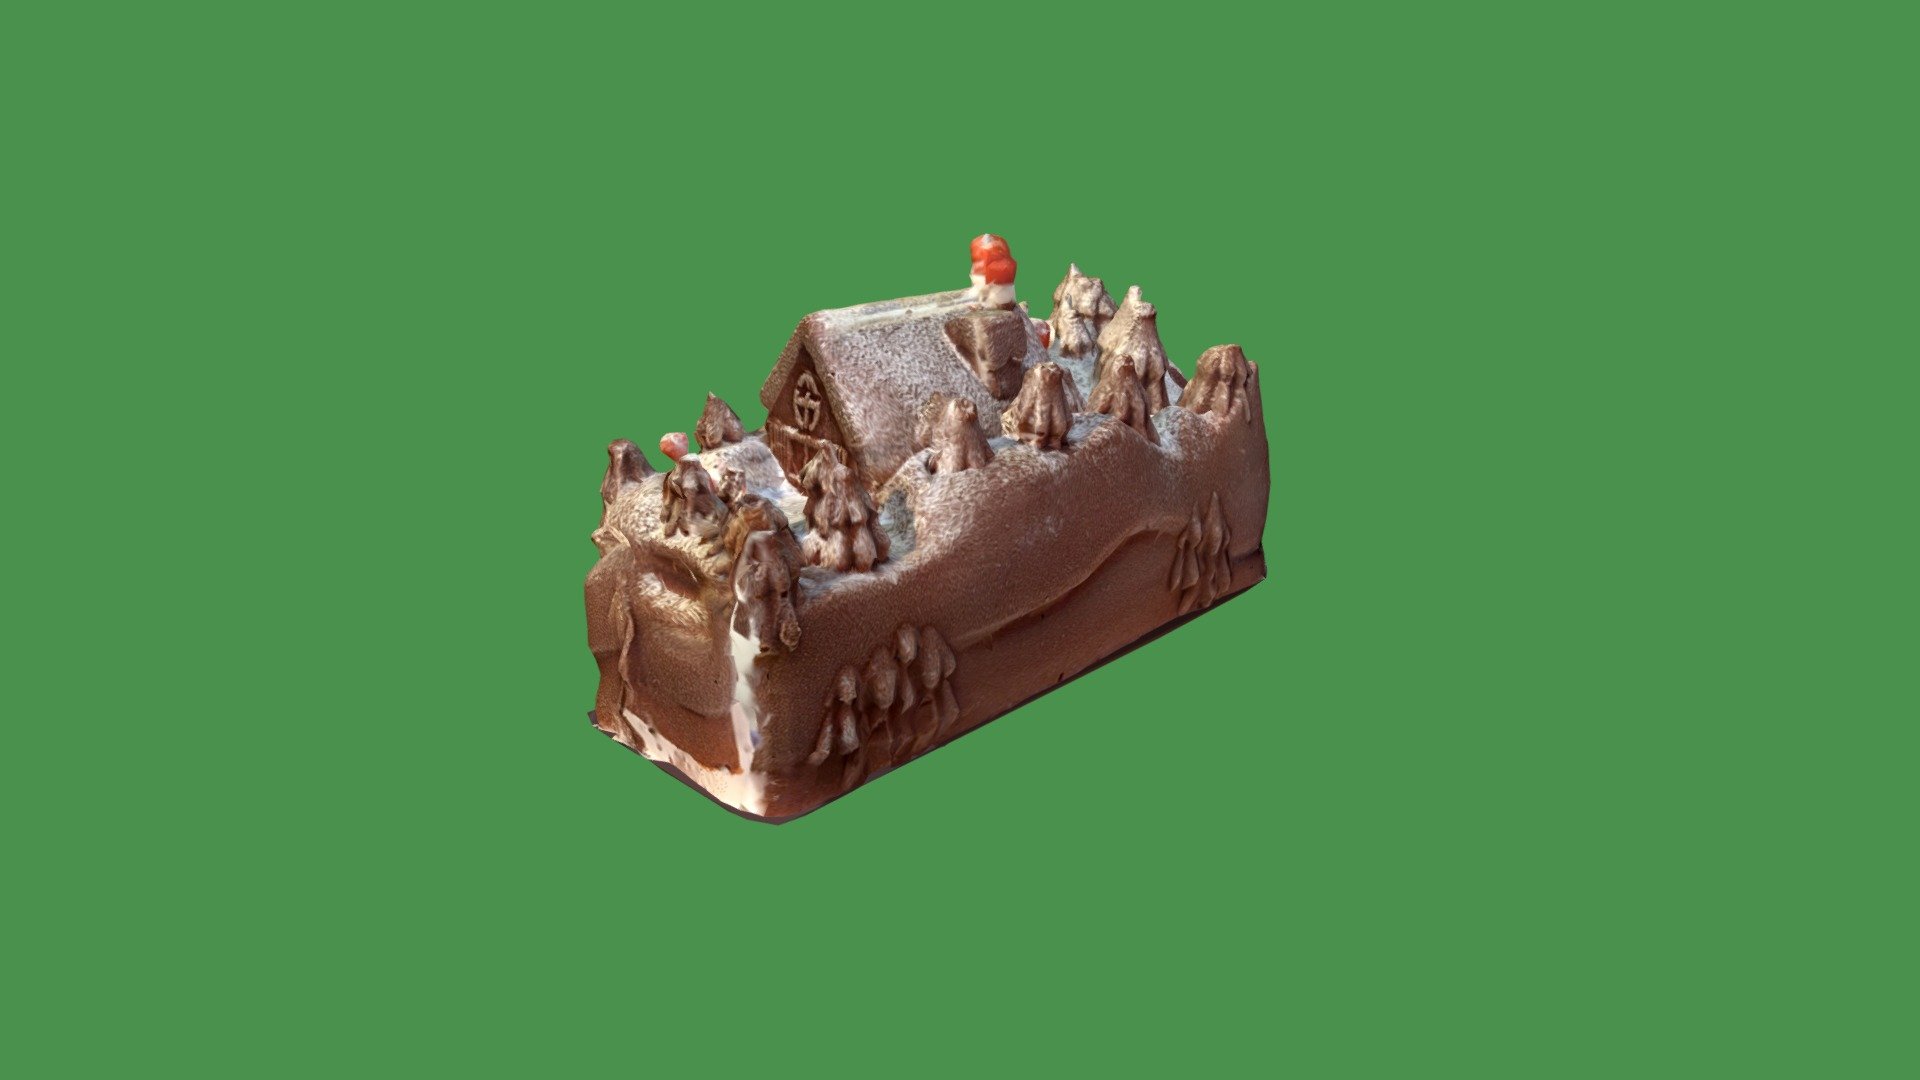 The Yule Log we shared as a family for Christmas!

—————————————————————————— 

DOWNLOAD — Also available for dowload: sketchfab.com/louis/store

8K texture attached as additional file.

Want to learn more about the technical details of this model? Use Sketchfab's model inspector. Protip, just press &ldquo;I